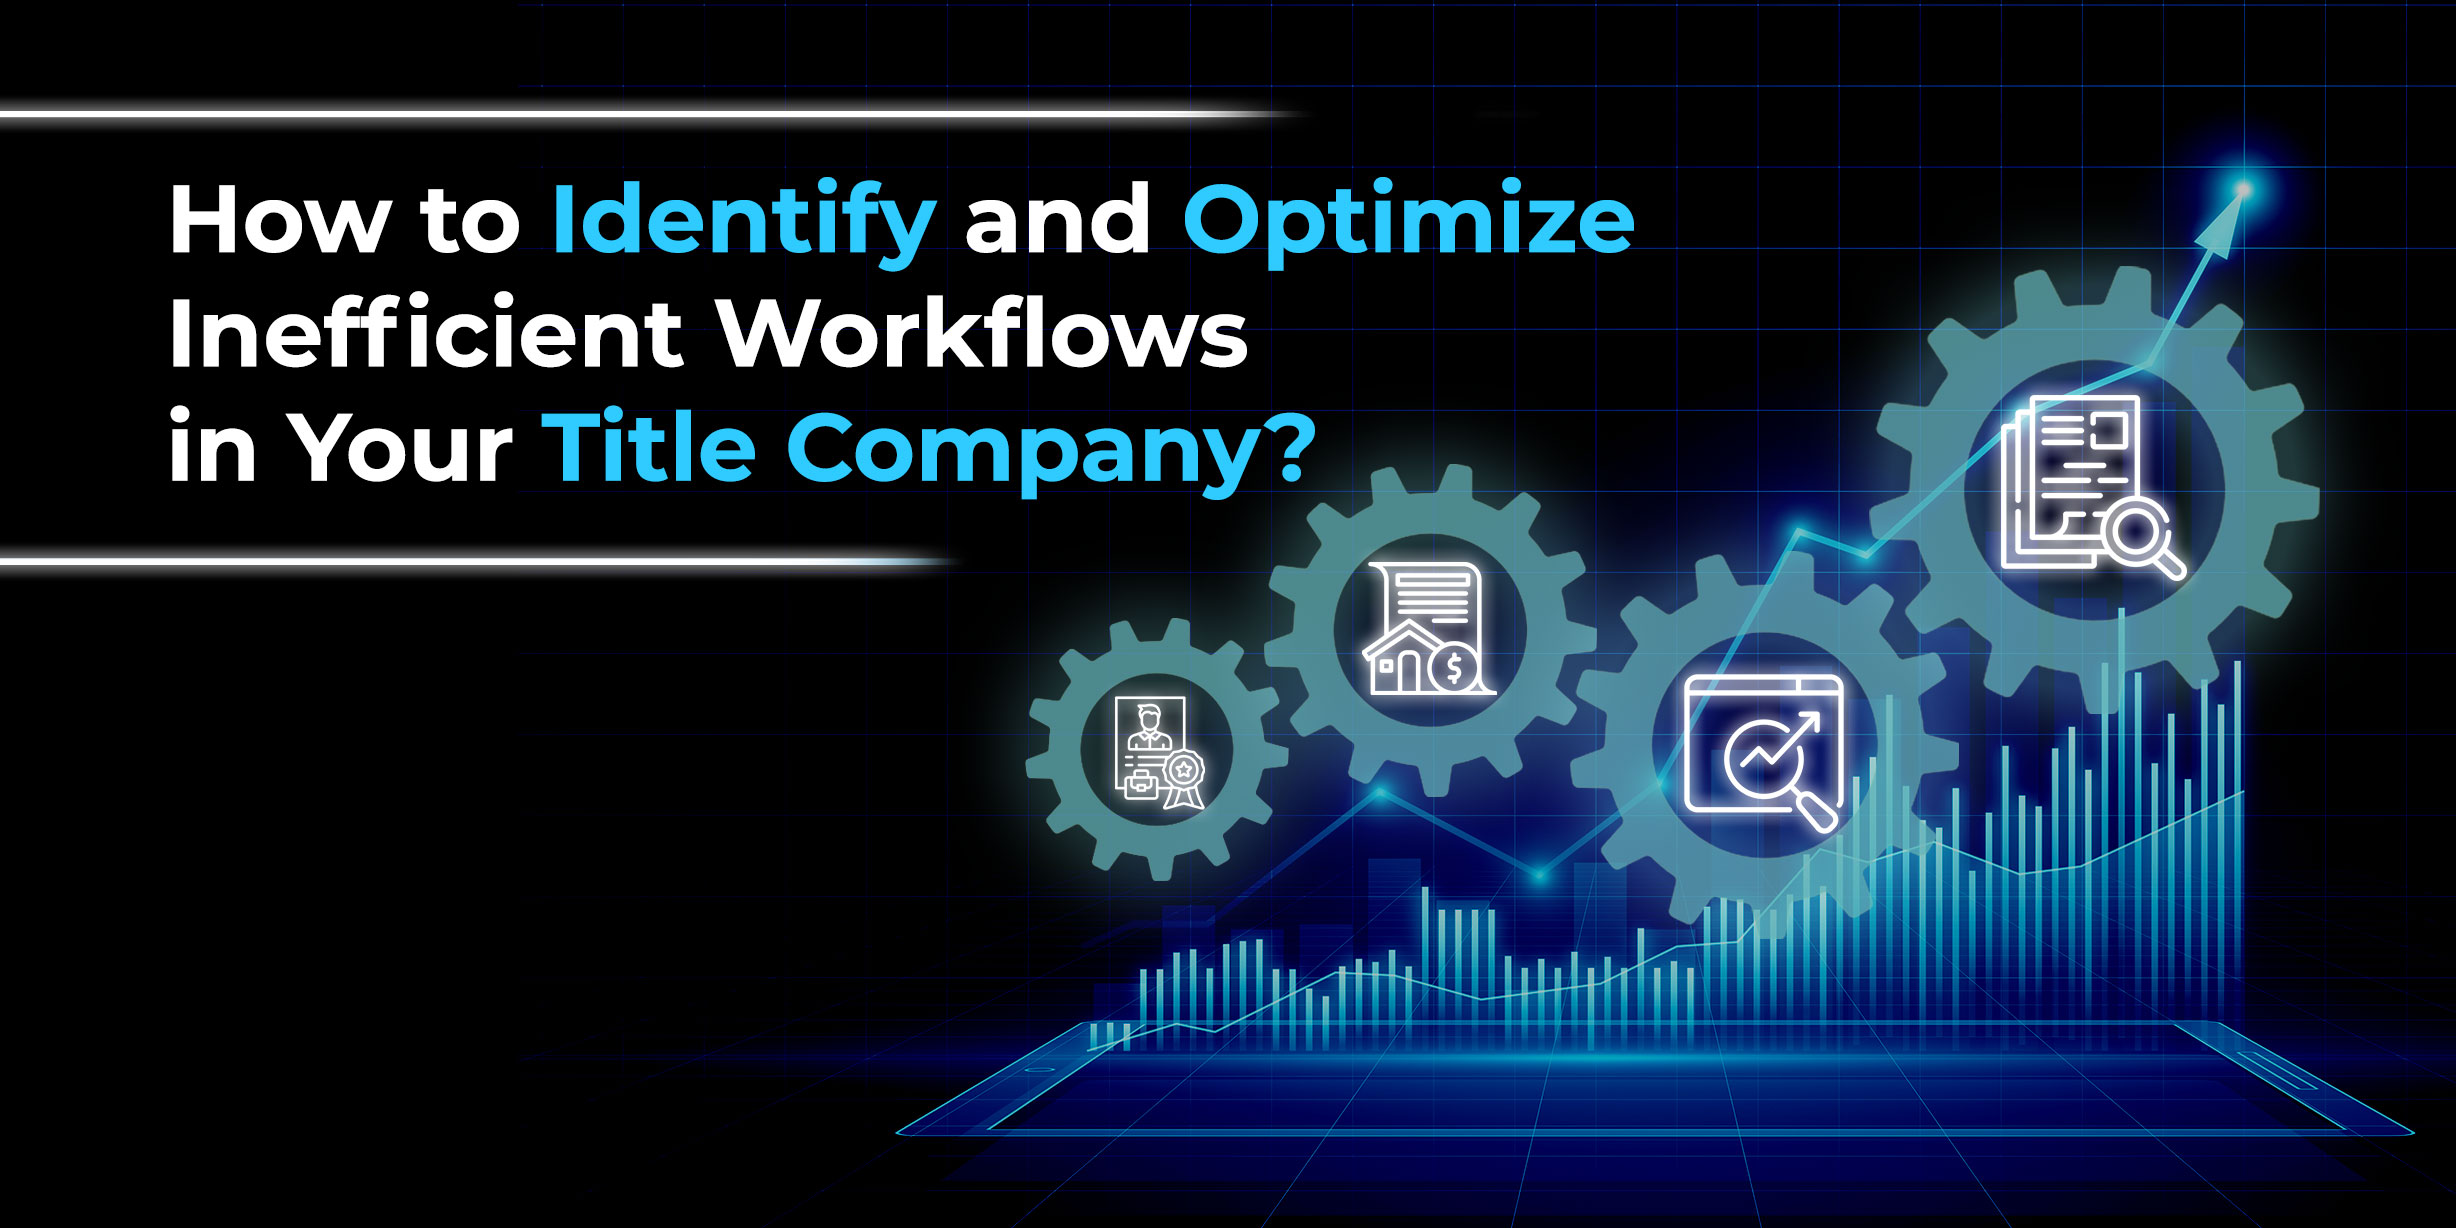 How to Identify and Optimize Inefficient Workflows in Your Title Company?